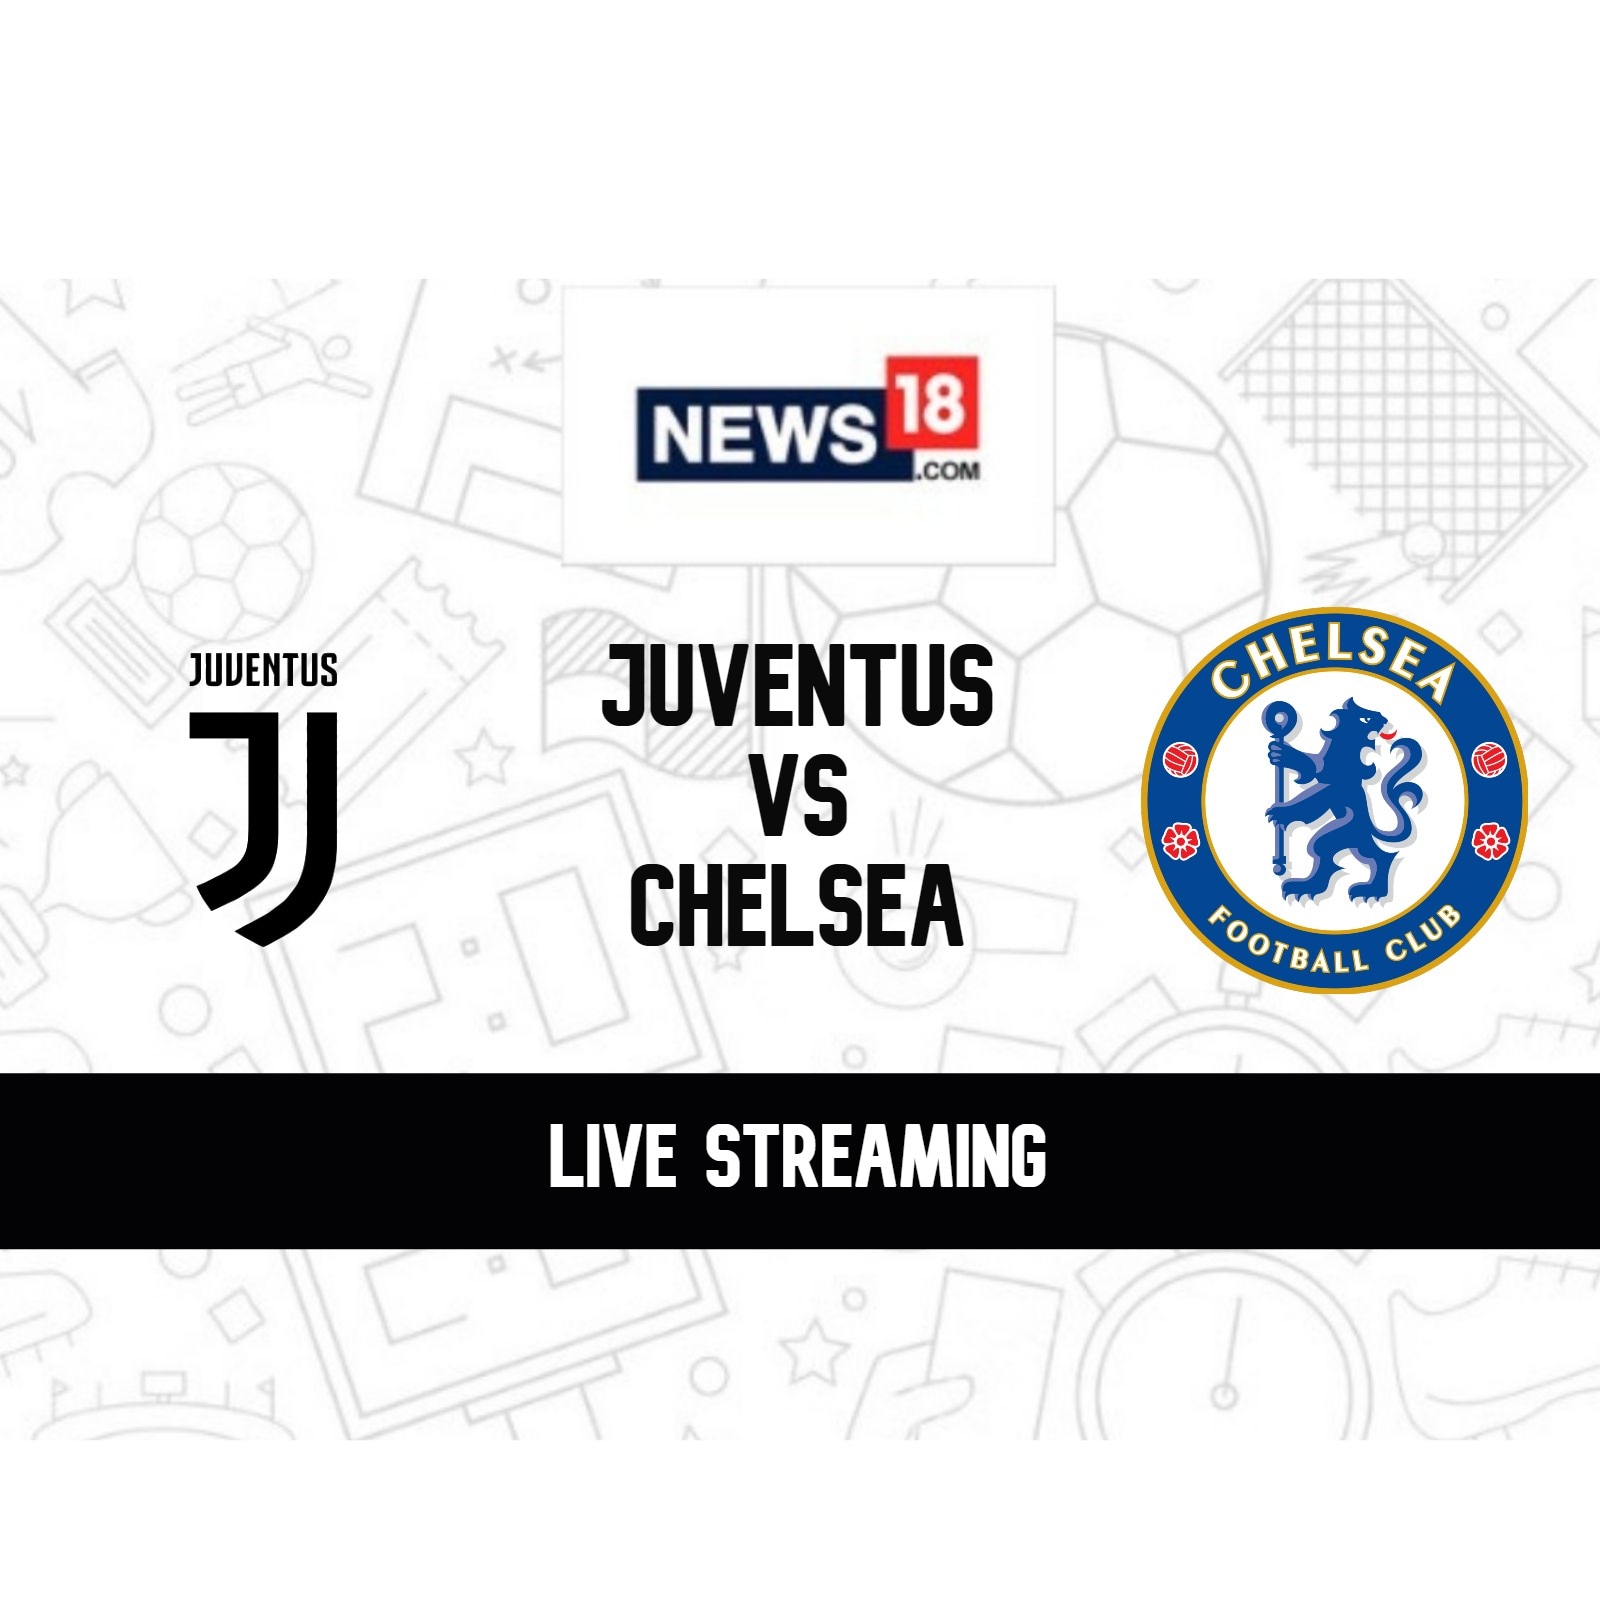 UEFA Champions League 2021-22 Juventus vs Chelsea LIVE Streaming When and Where to Watch Online, TV Telecast, Team News